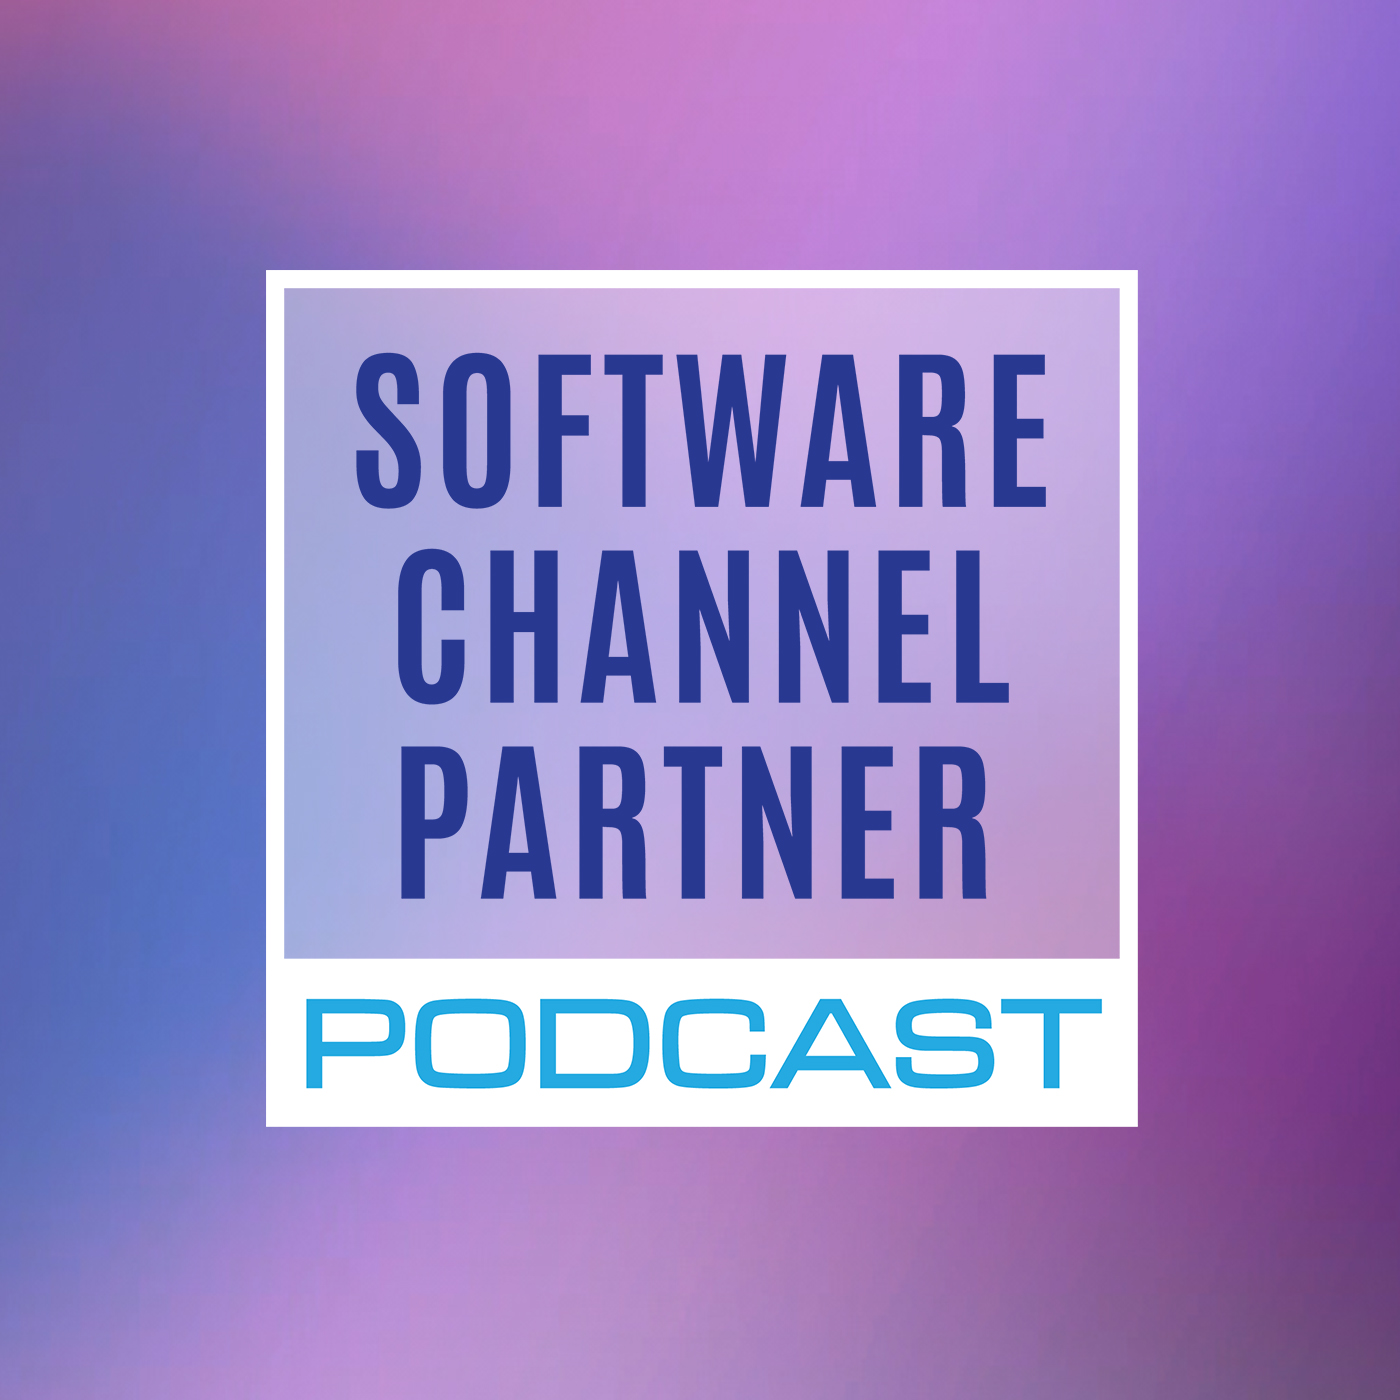 The Software Channel Partner Podcast